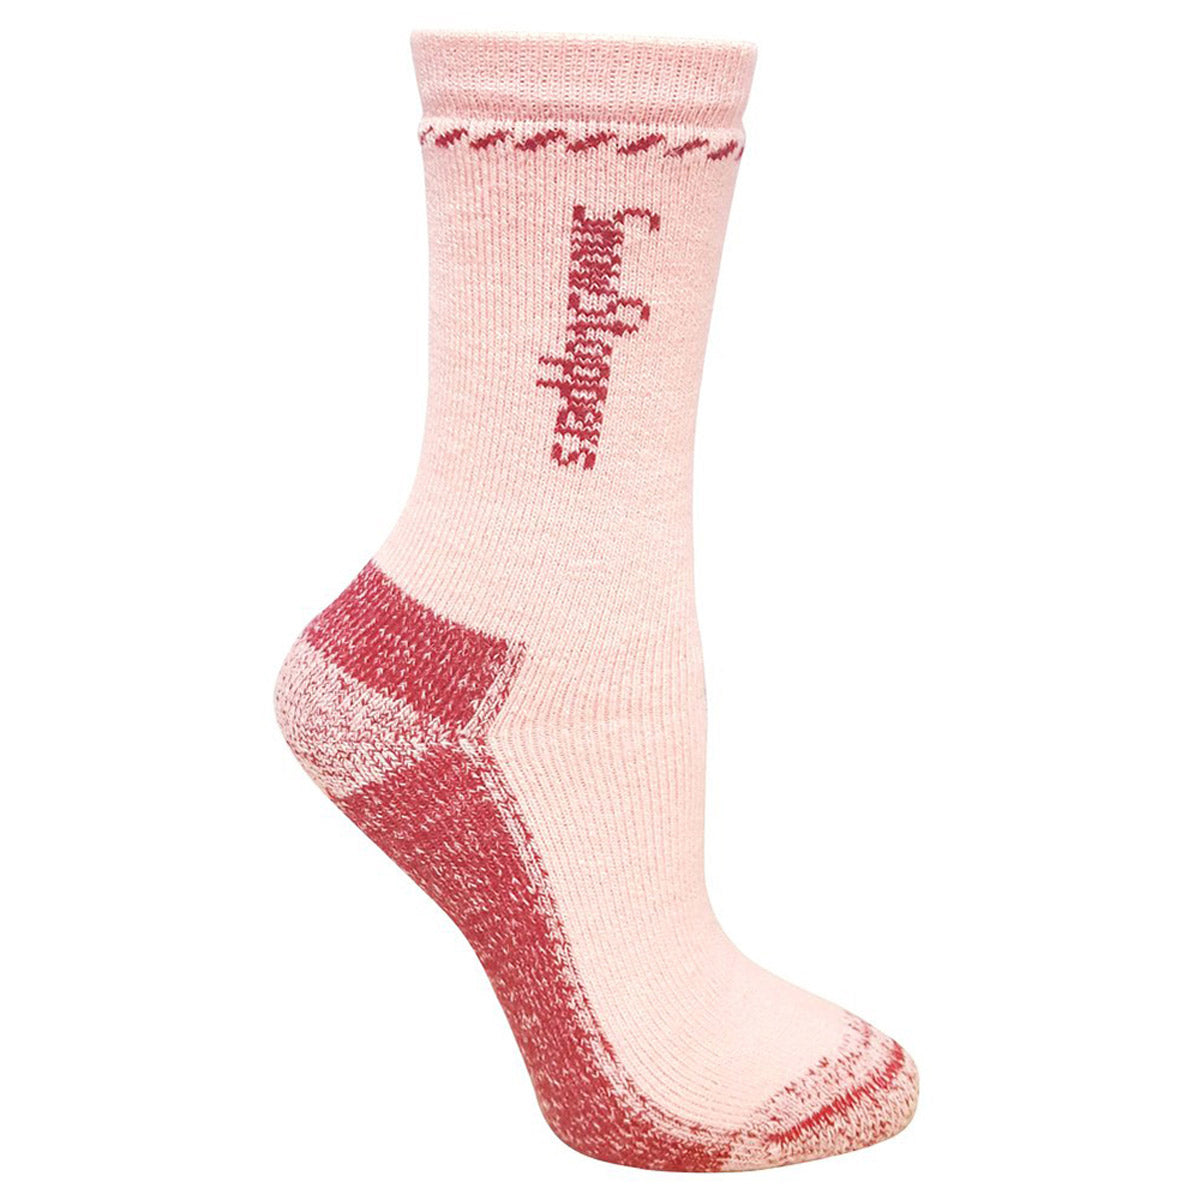 Single SNOWSTOPPERS ALPACA SOCK PINK/RED - KIDS athletic sock with reinforced heel and toe areas displayed against a white background by Canadiansox.